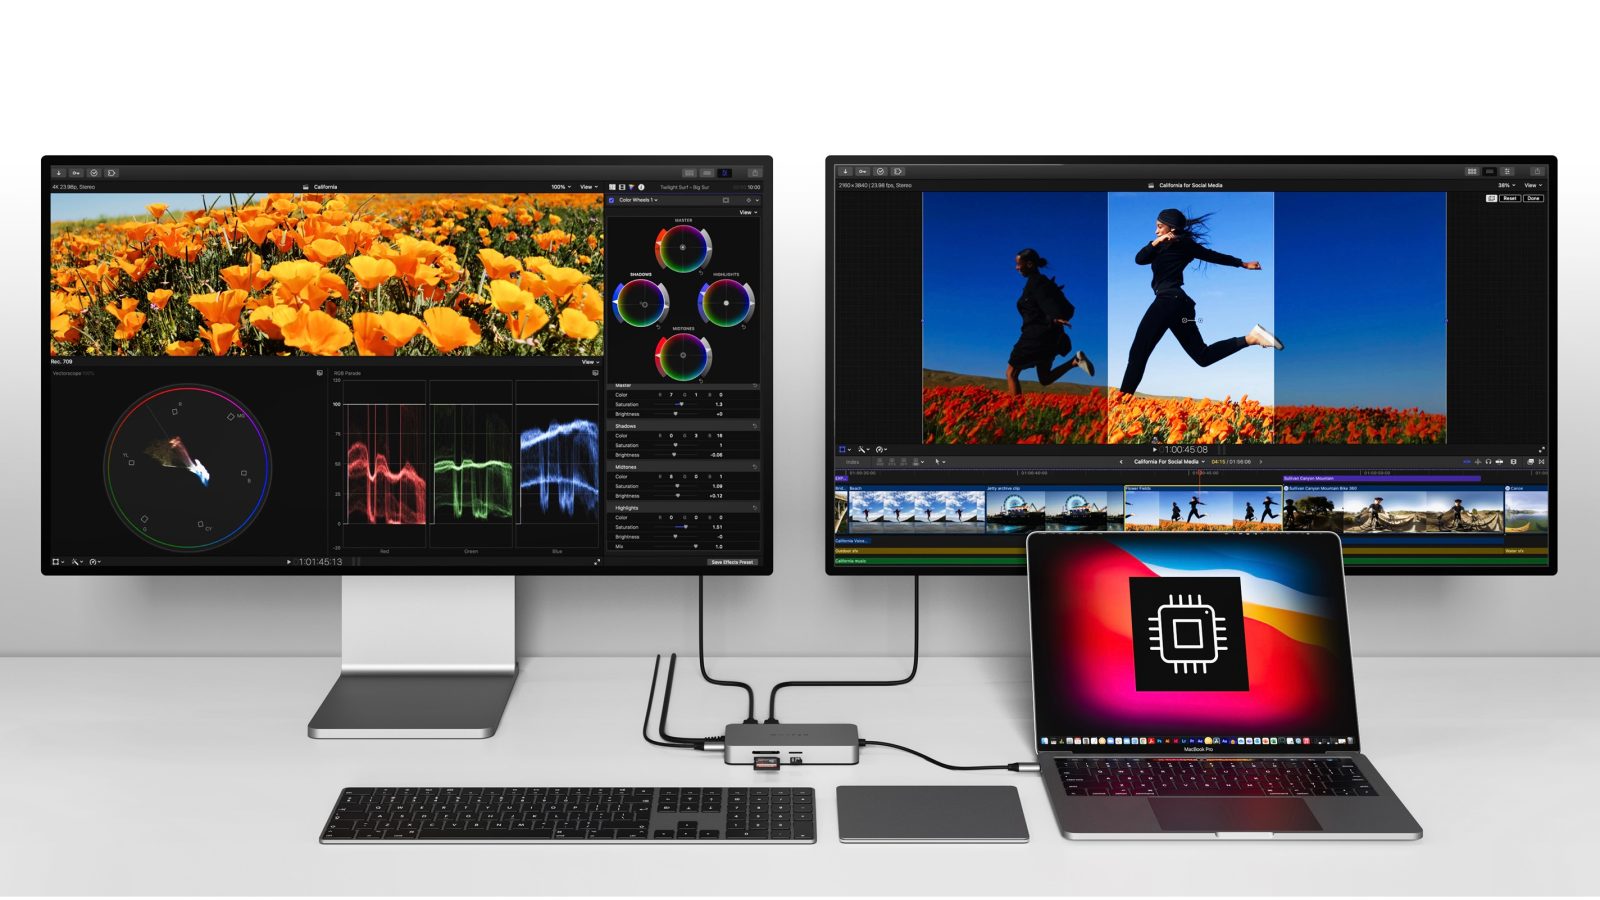 Hyper new 4K HDMI' dongles for using multiple external displays with M1 Macs - 9to5Mac